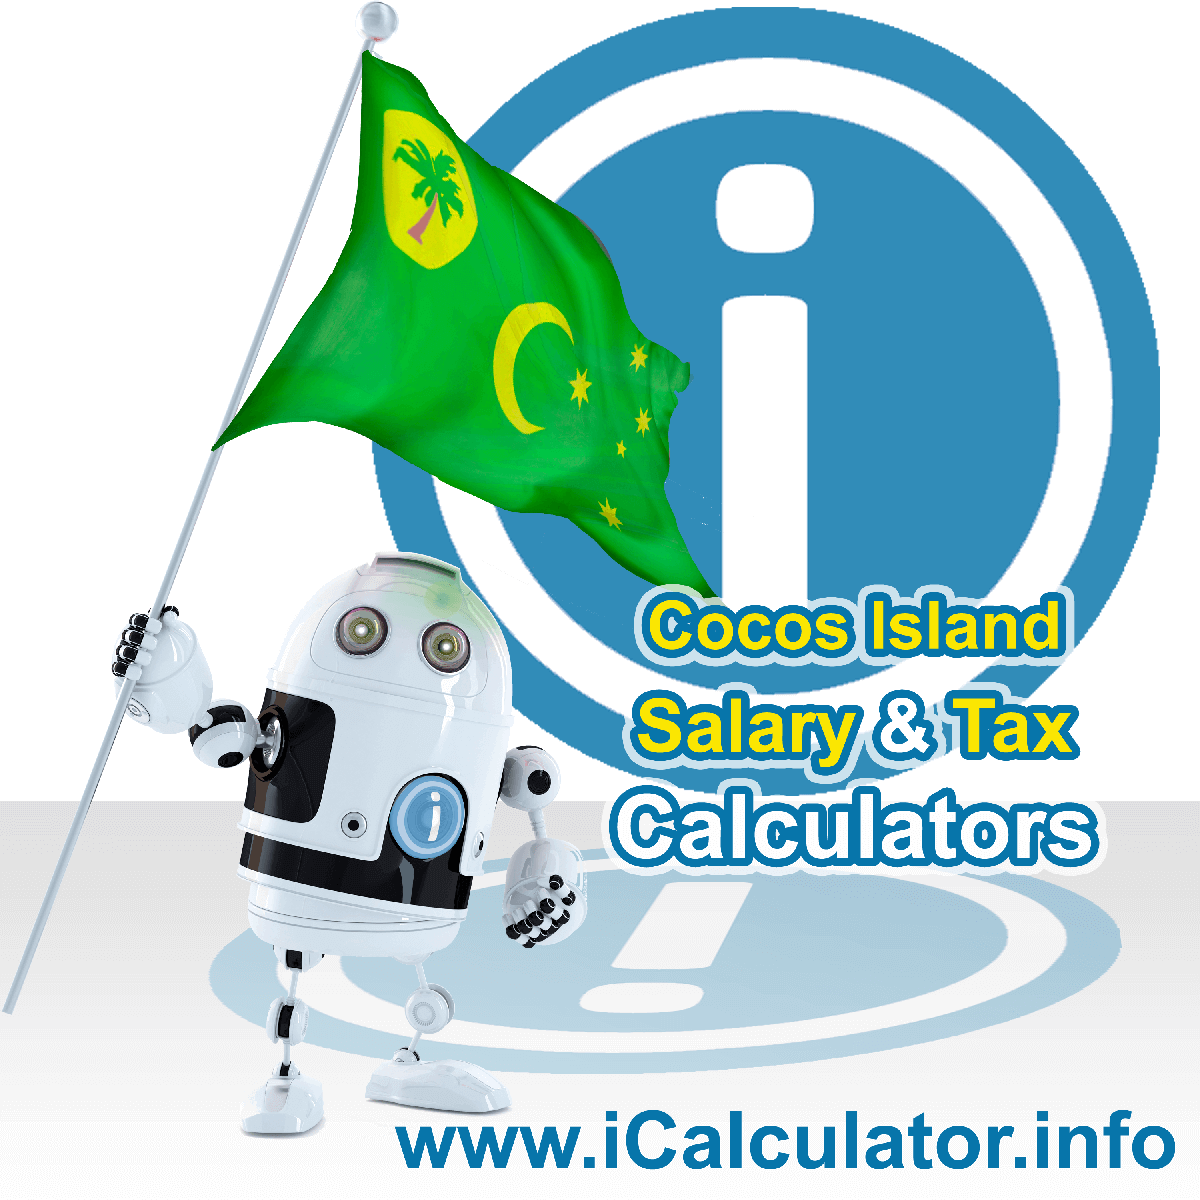 Cocos Islands Tax Calculator. This image shows the Cocos Islands flag and information relating to the tax formula for the Cocos Islands Salary Calculator